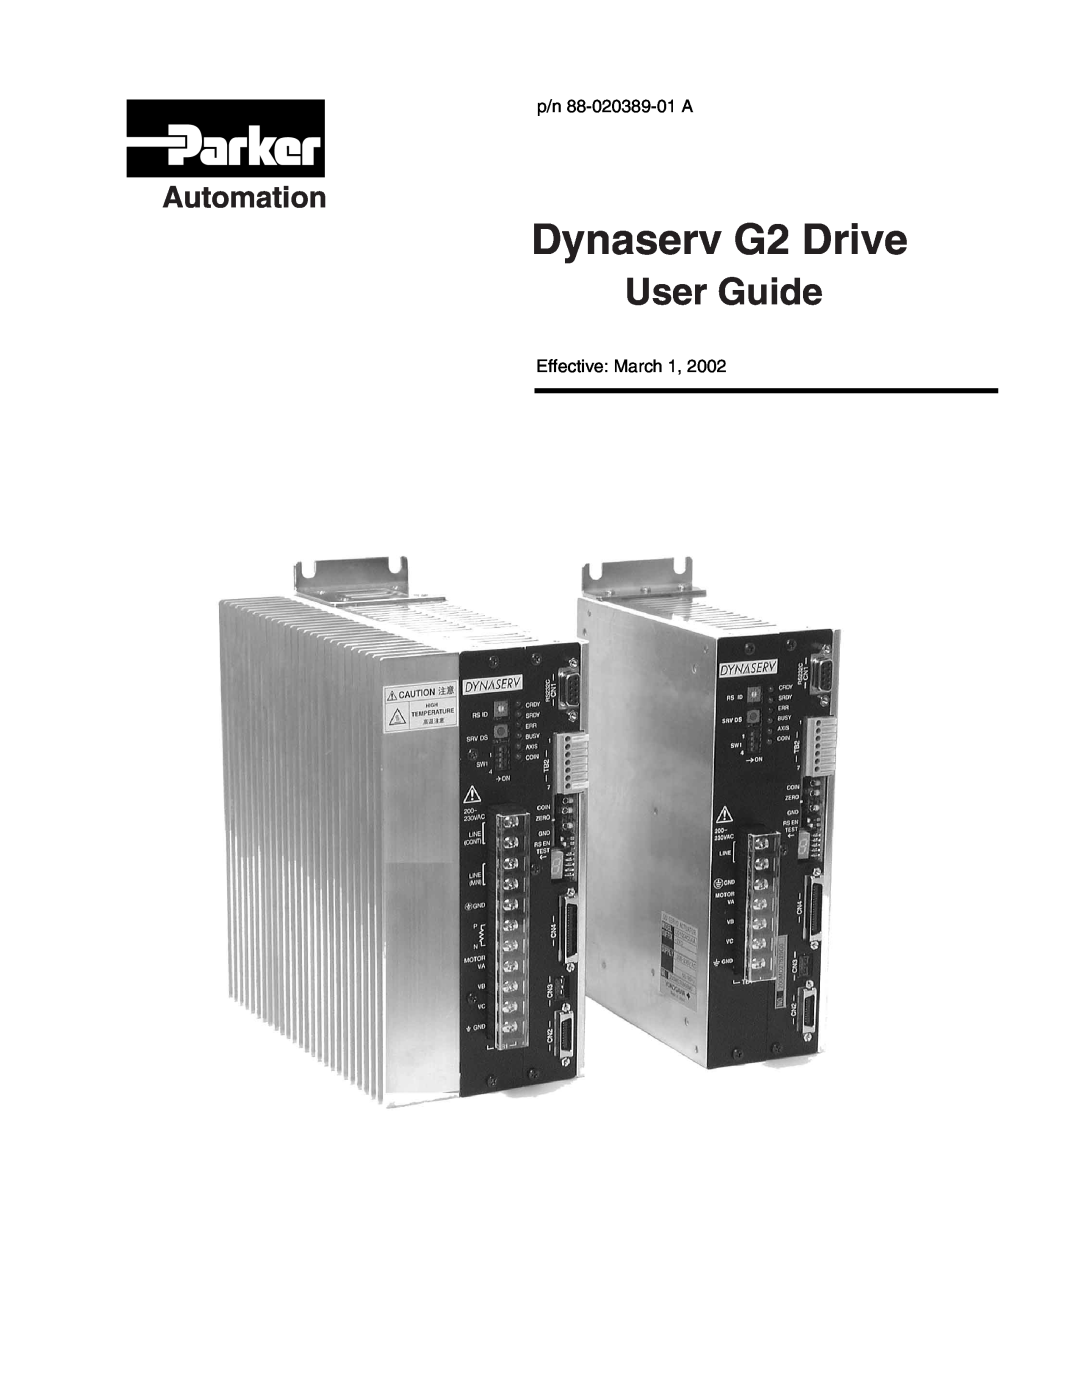 Parker Hannifin manual Dynaserv G2 Drive, User Guide, Automation, p/n 88-020389-01 A, Effective March 1 